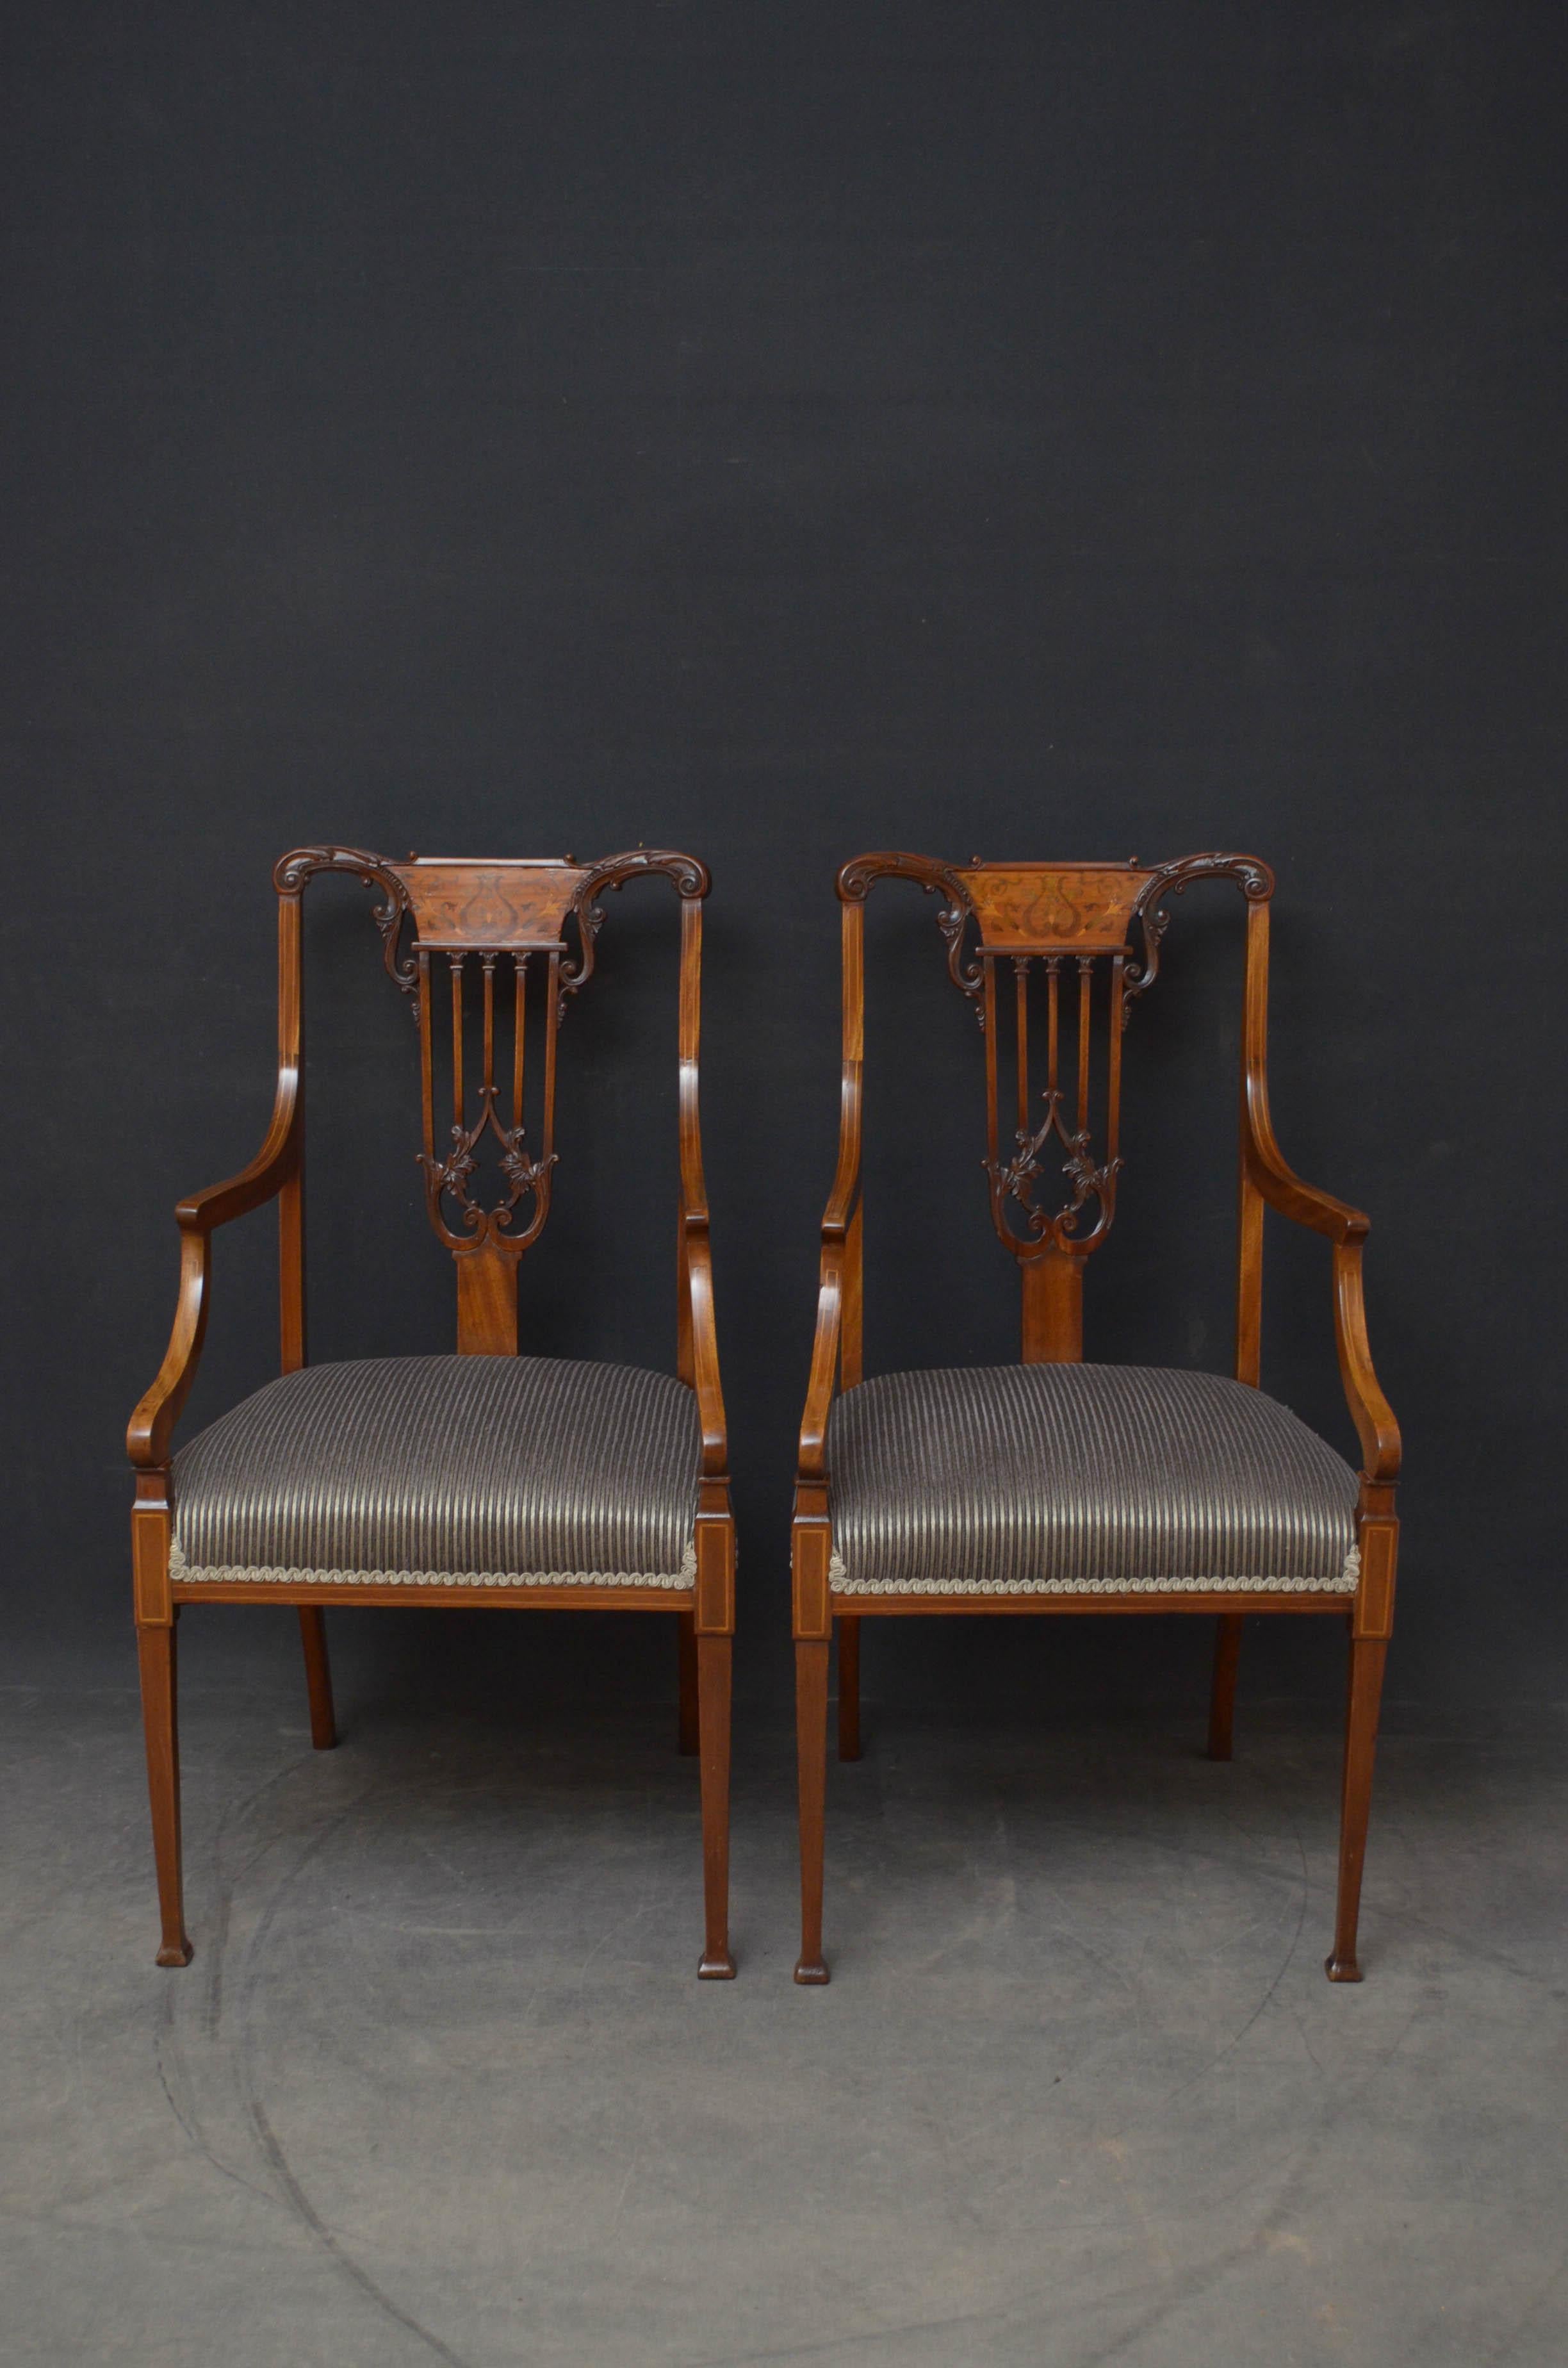 Sn4794 Superb pair of mahogany elbow chairs, each having finely carved rail with inlaid splat and carved slats above newly covered overstuffed seat and satinwood string inlaid open arms, standing on tapered legs terminating in pad feet. This pair of